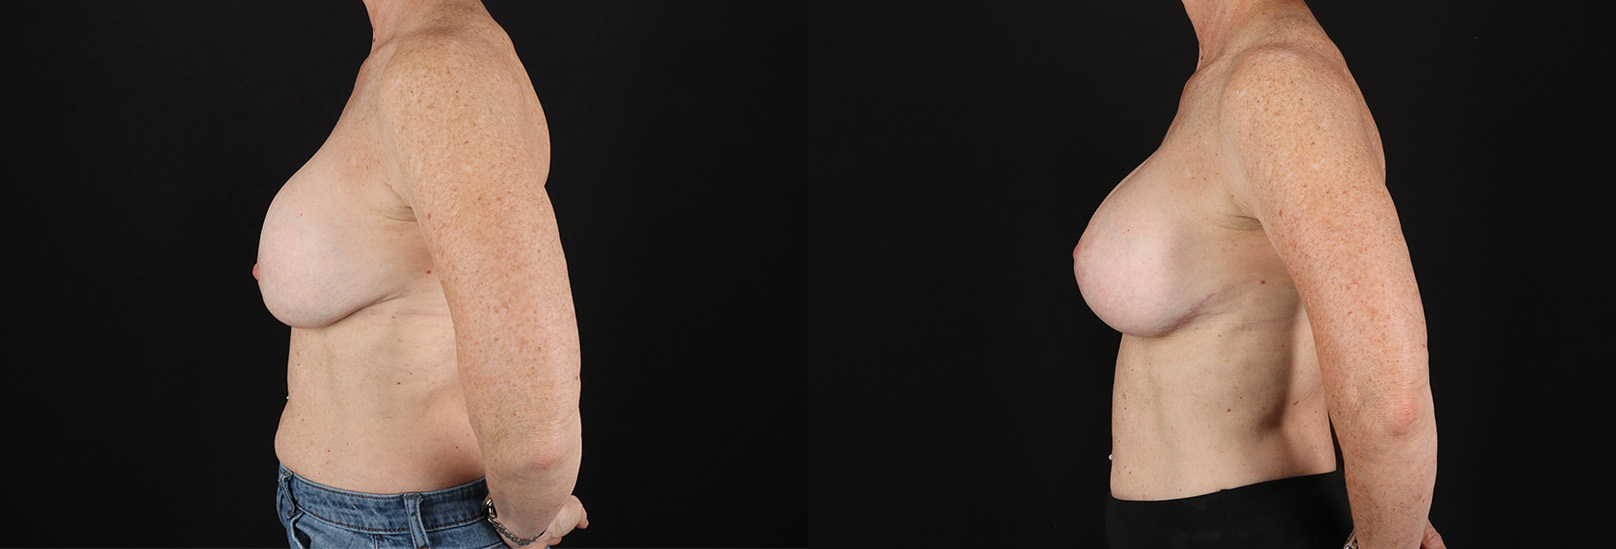 Revision Breast Surgery before and after photo by Dr. Erika A. Sato in Houston, TX